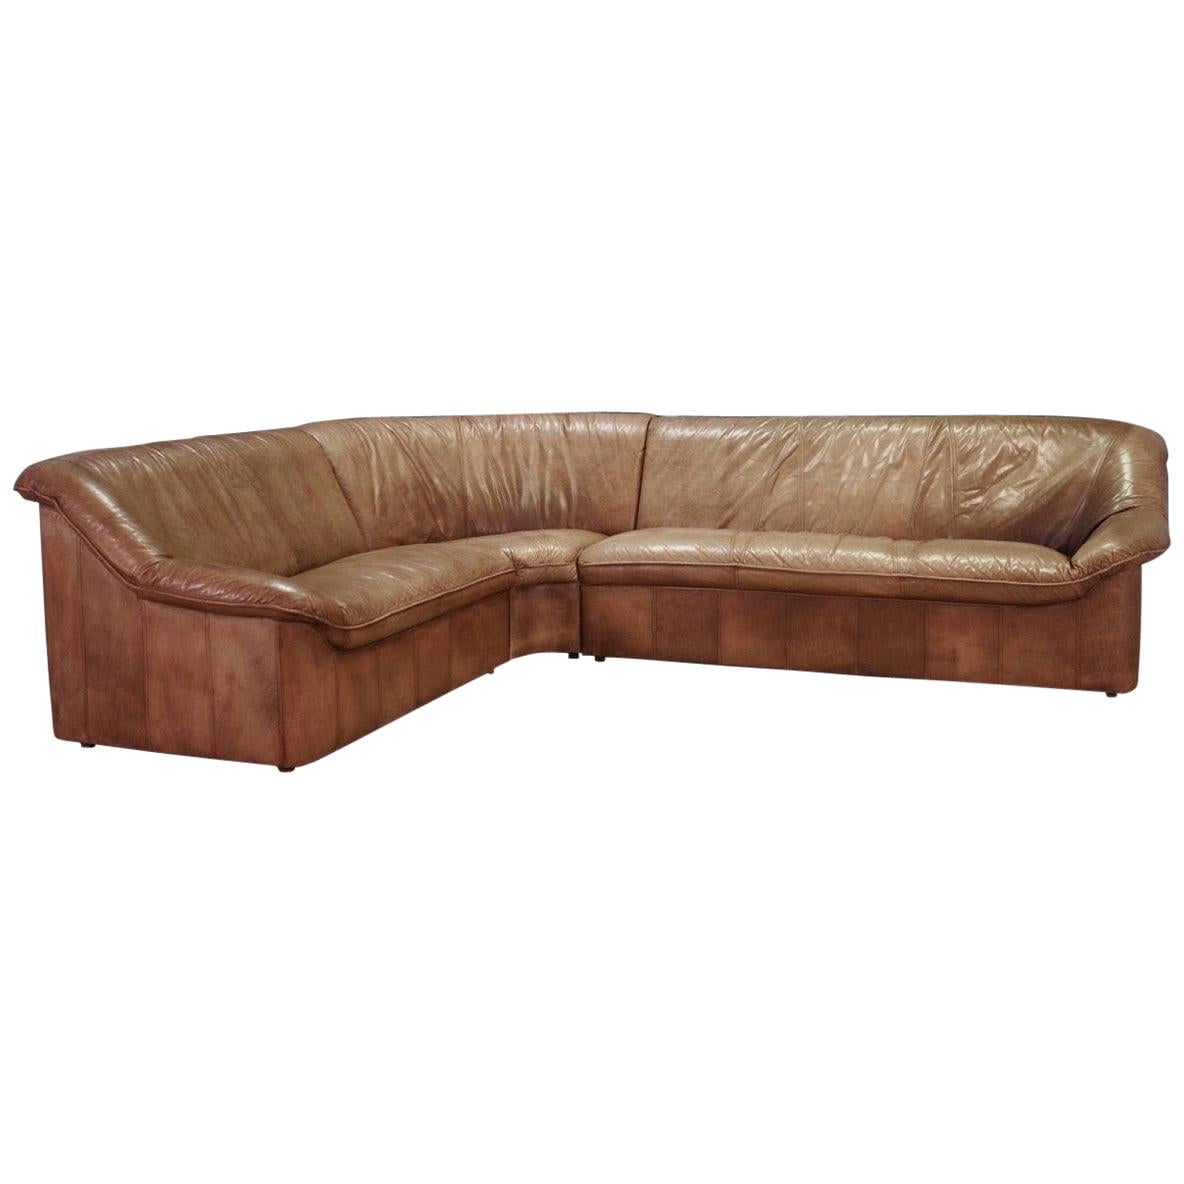 Corner Brown Leather Sofa 1960s Vintage Leather For Sale